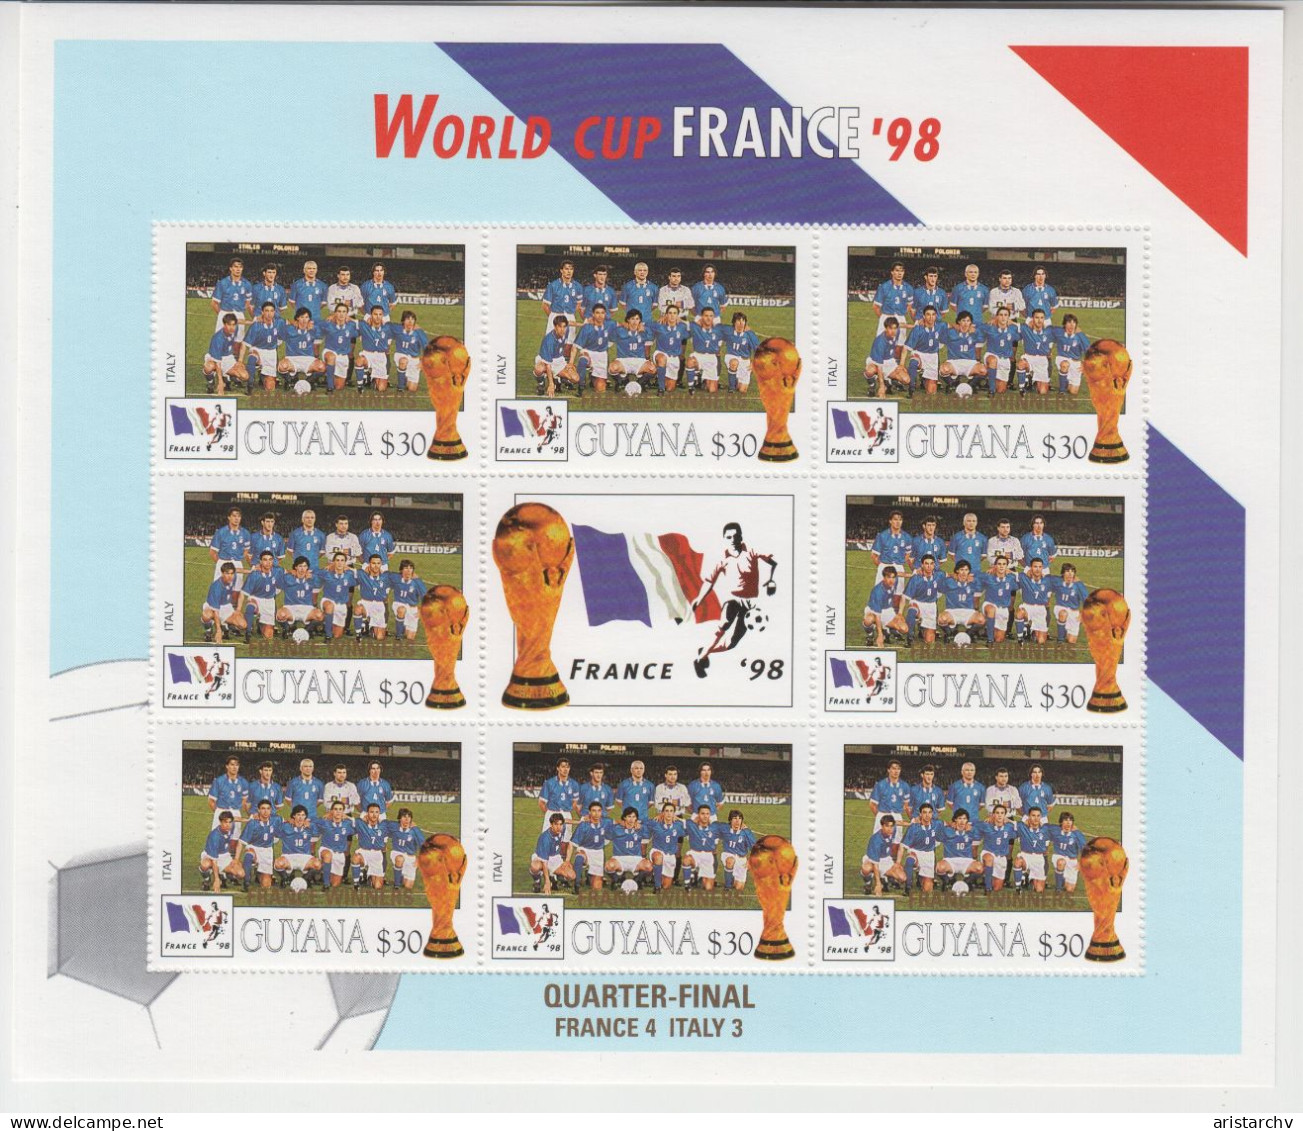 GUYANA 1998 FOOTBALL WORLD CUP 8 STAMPS AND 8 SHEETLETS OVERPRINT